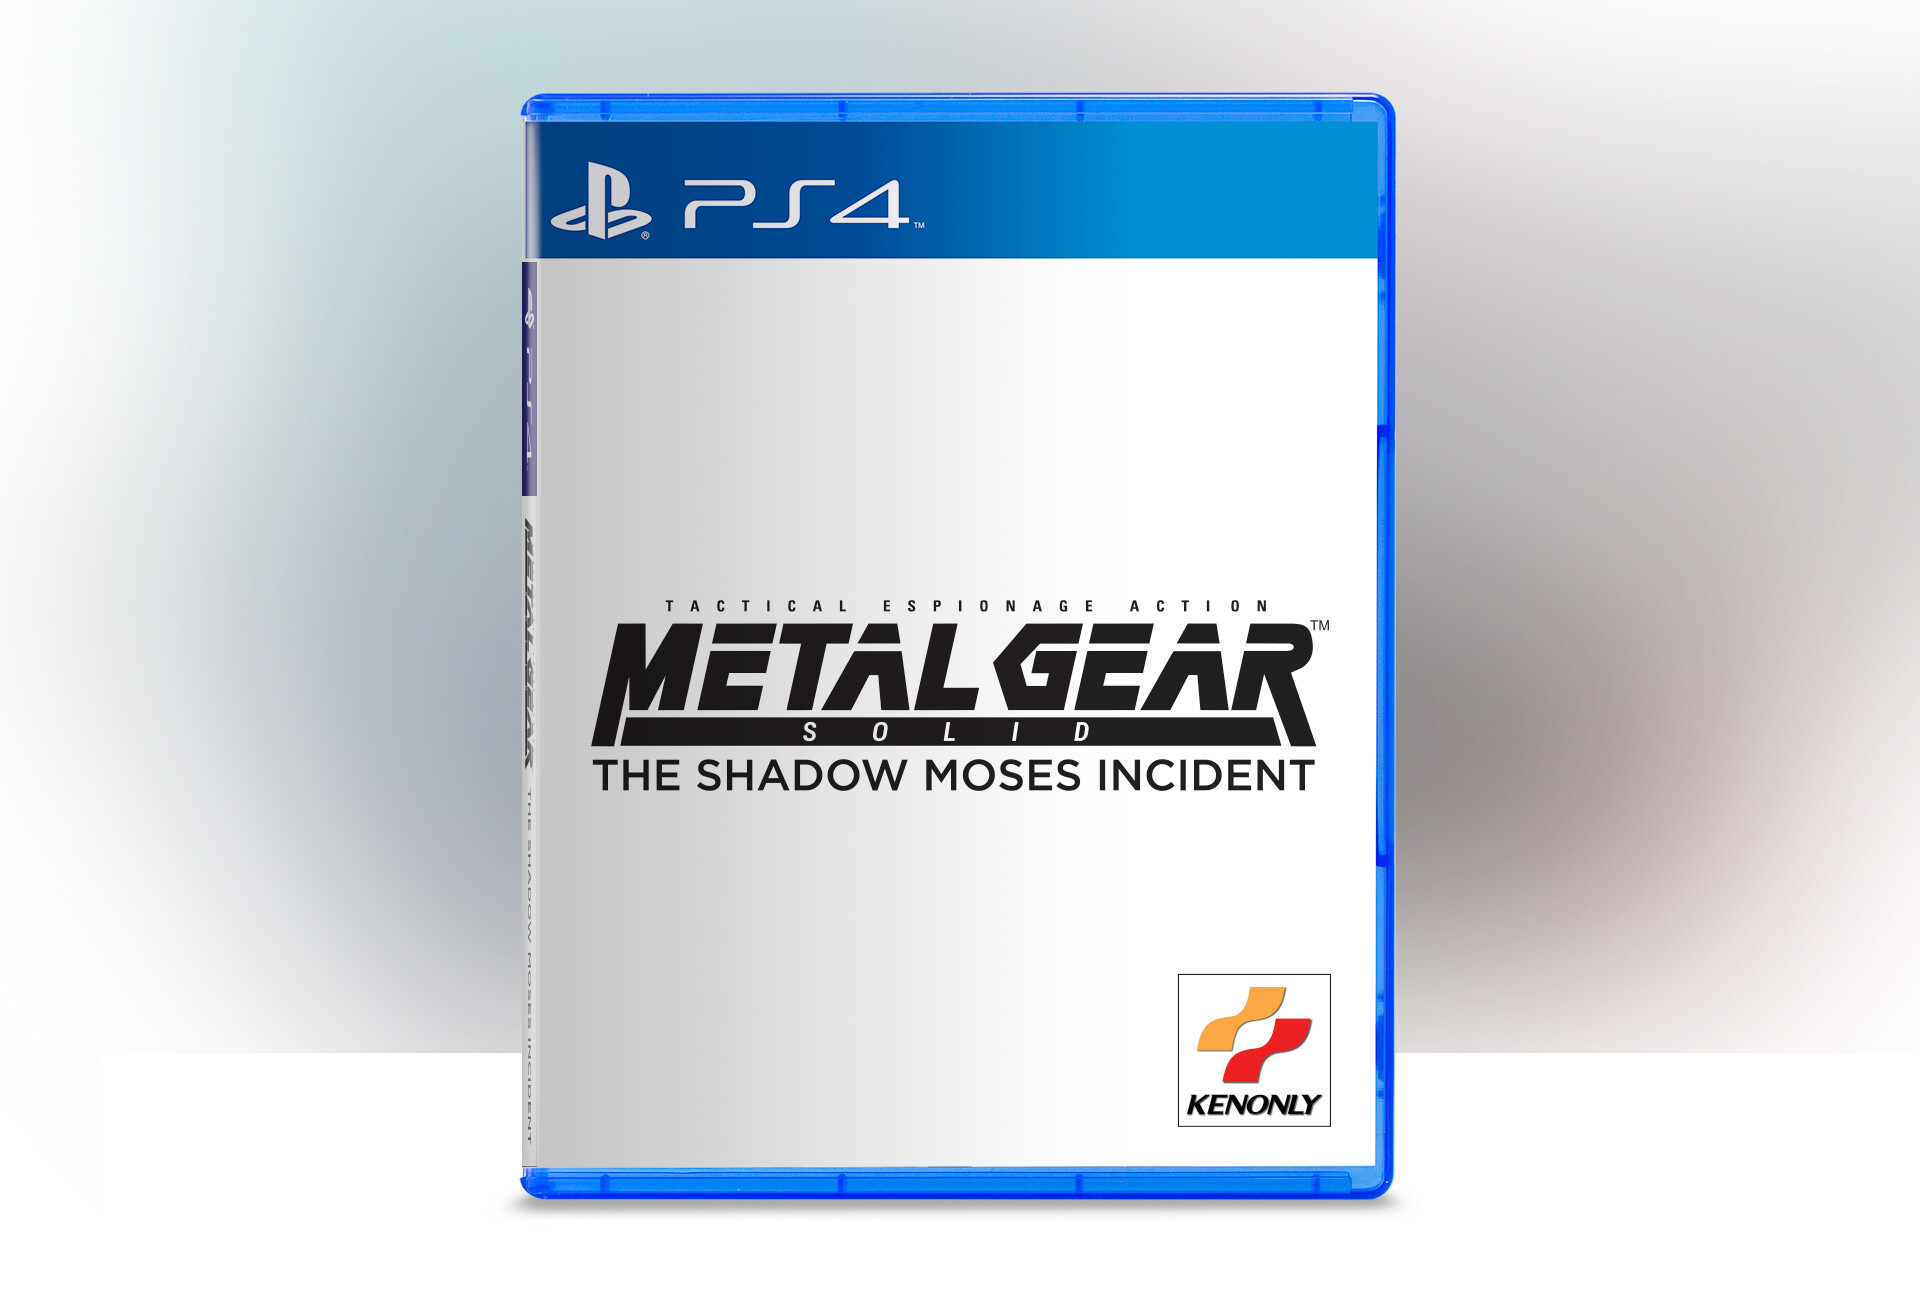 ArtStation - Gear Solid Fan Redesign - PS4 Case and Disc Mockup